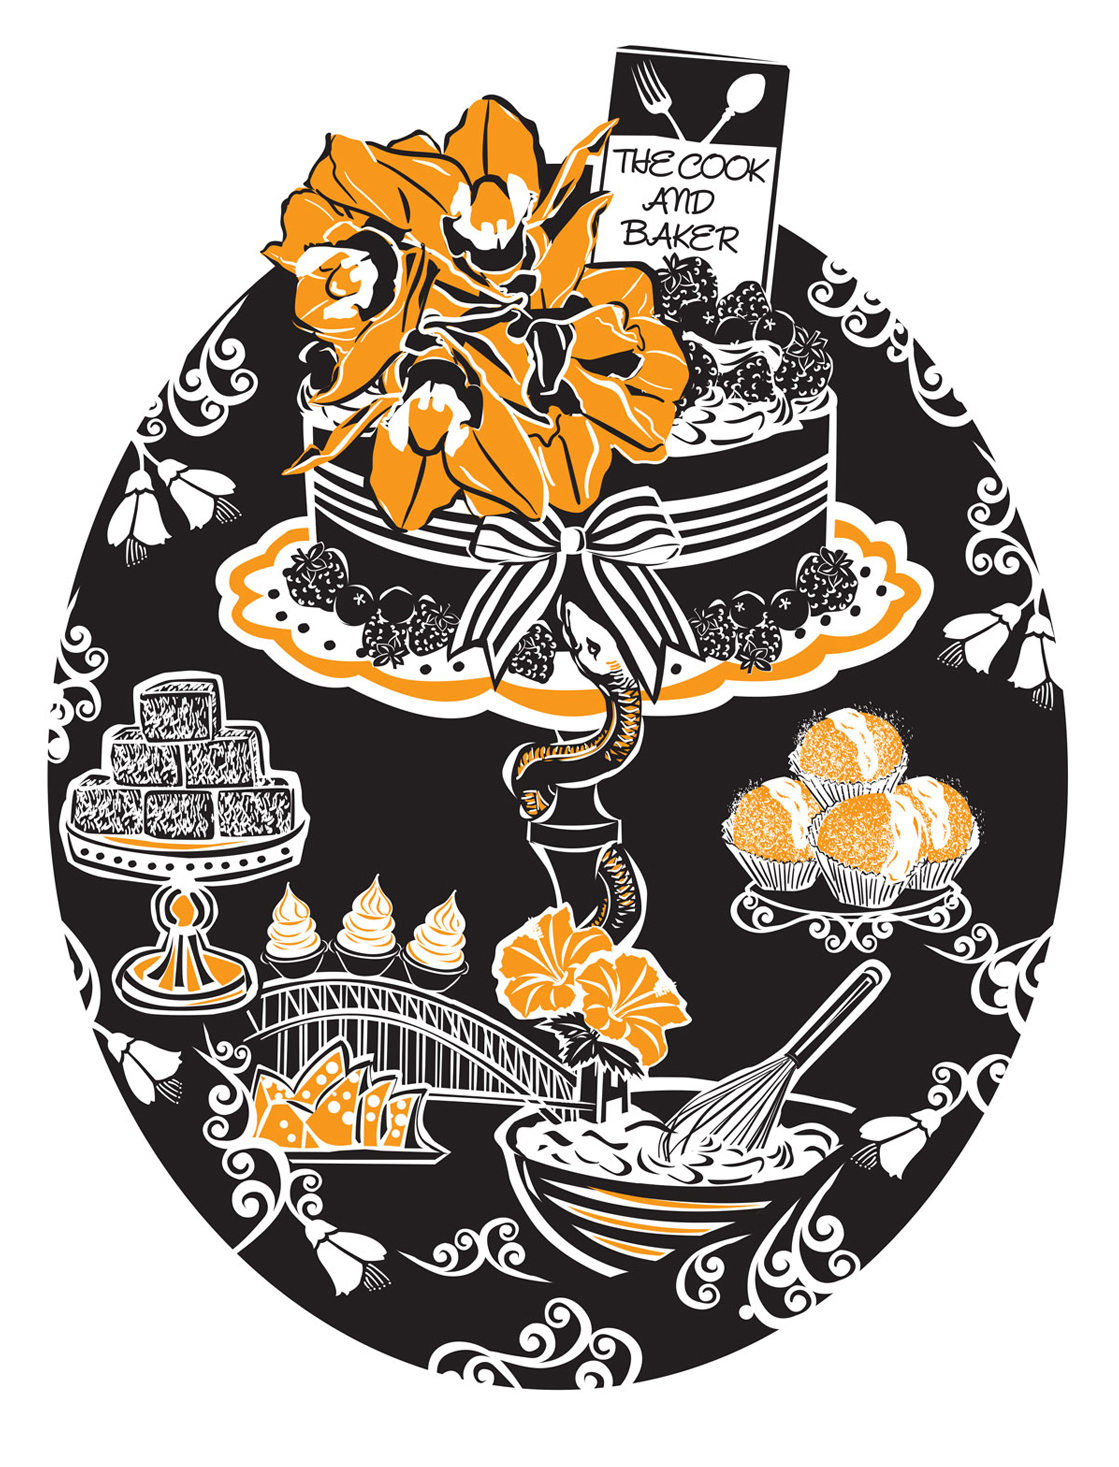  Tea towel commissioned by 'The Cook and Baker' café, Sydney 2015. 